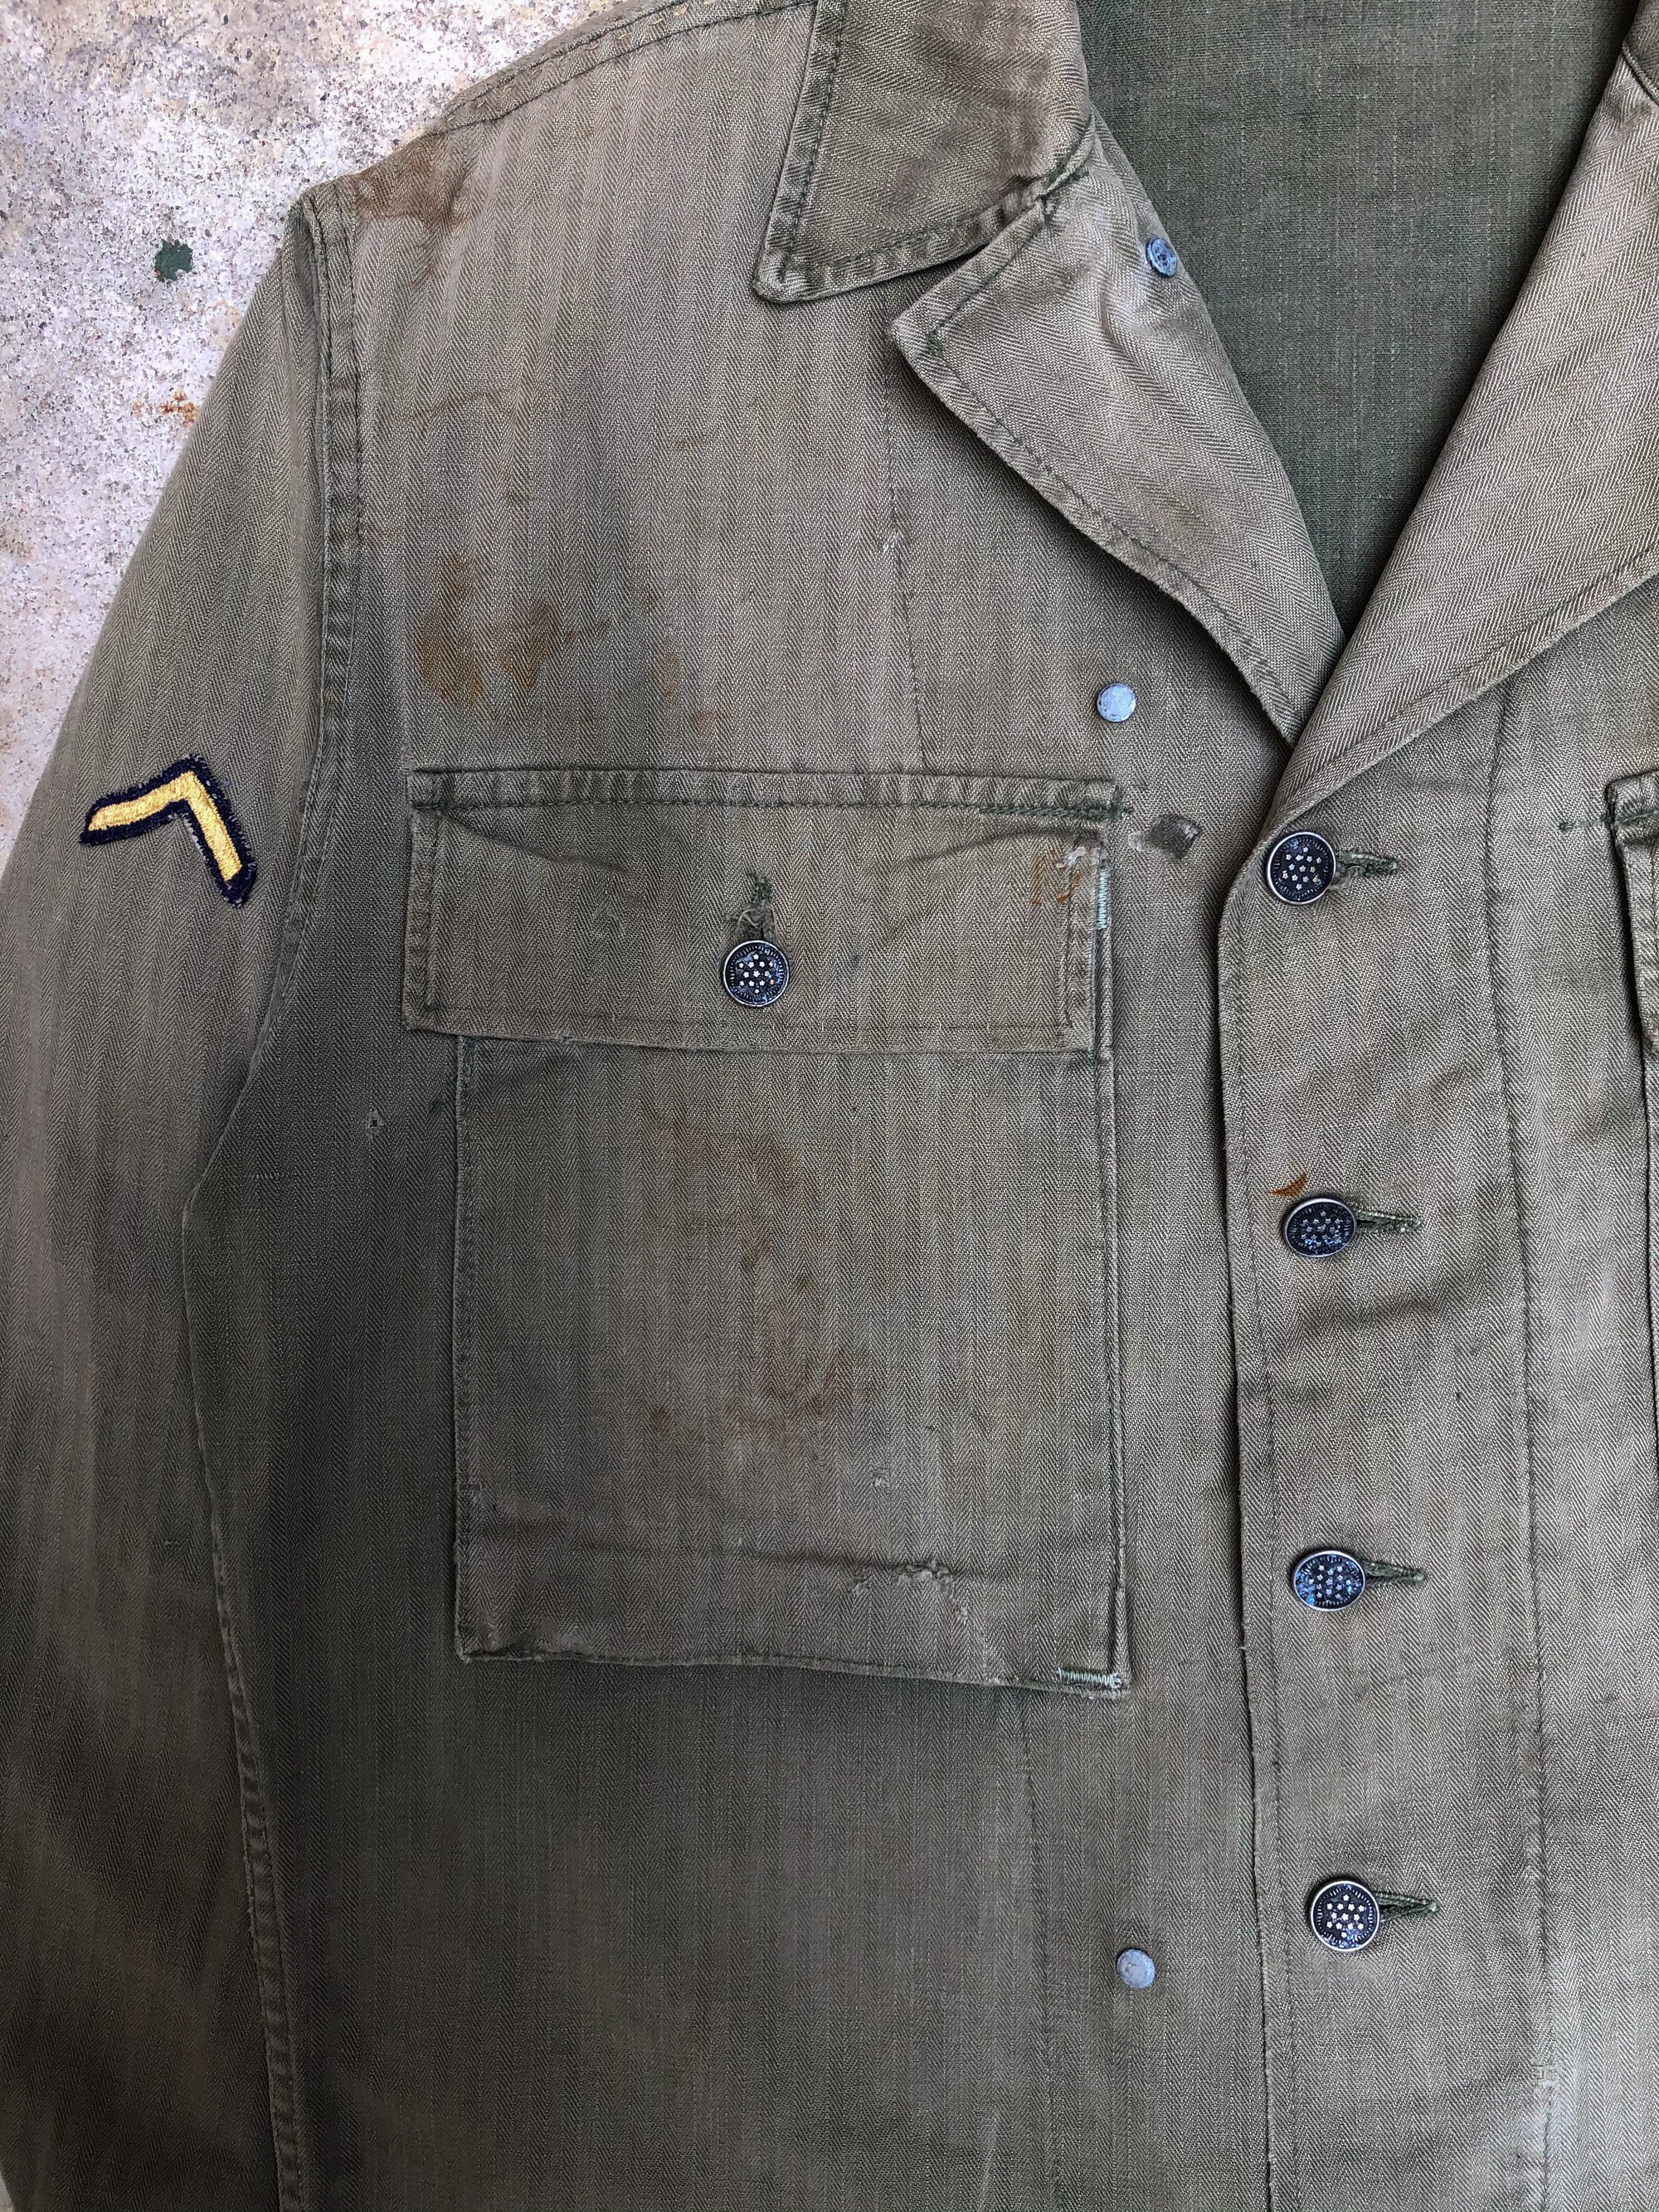 1940s WWII Sun Faded Repaired P43 HBT Shirt